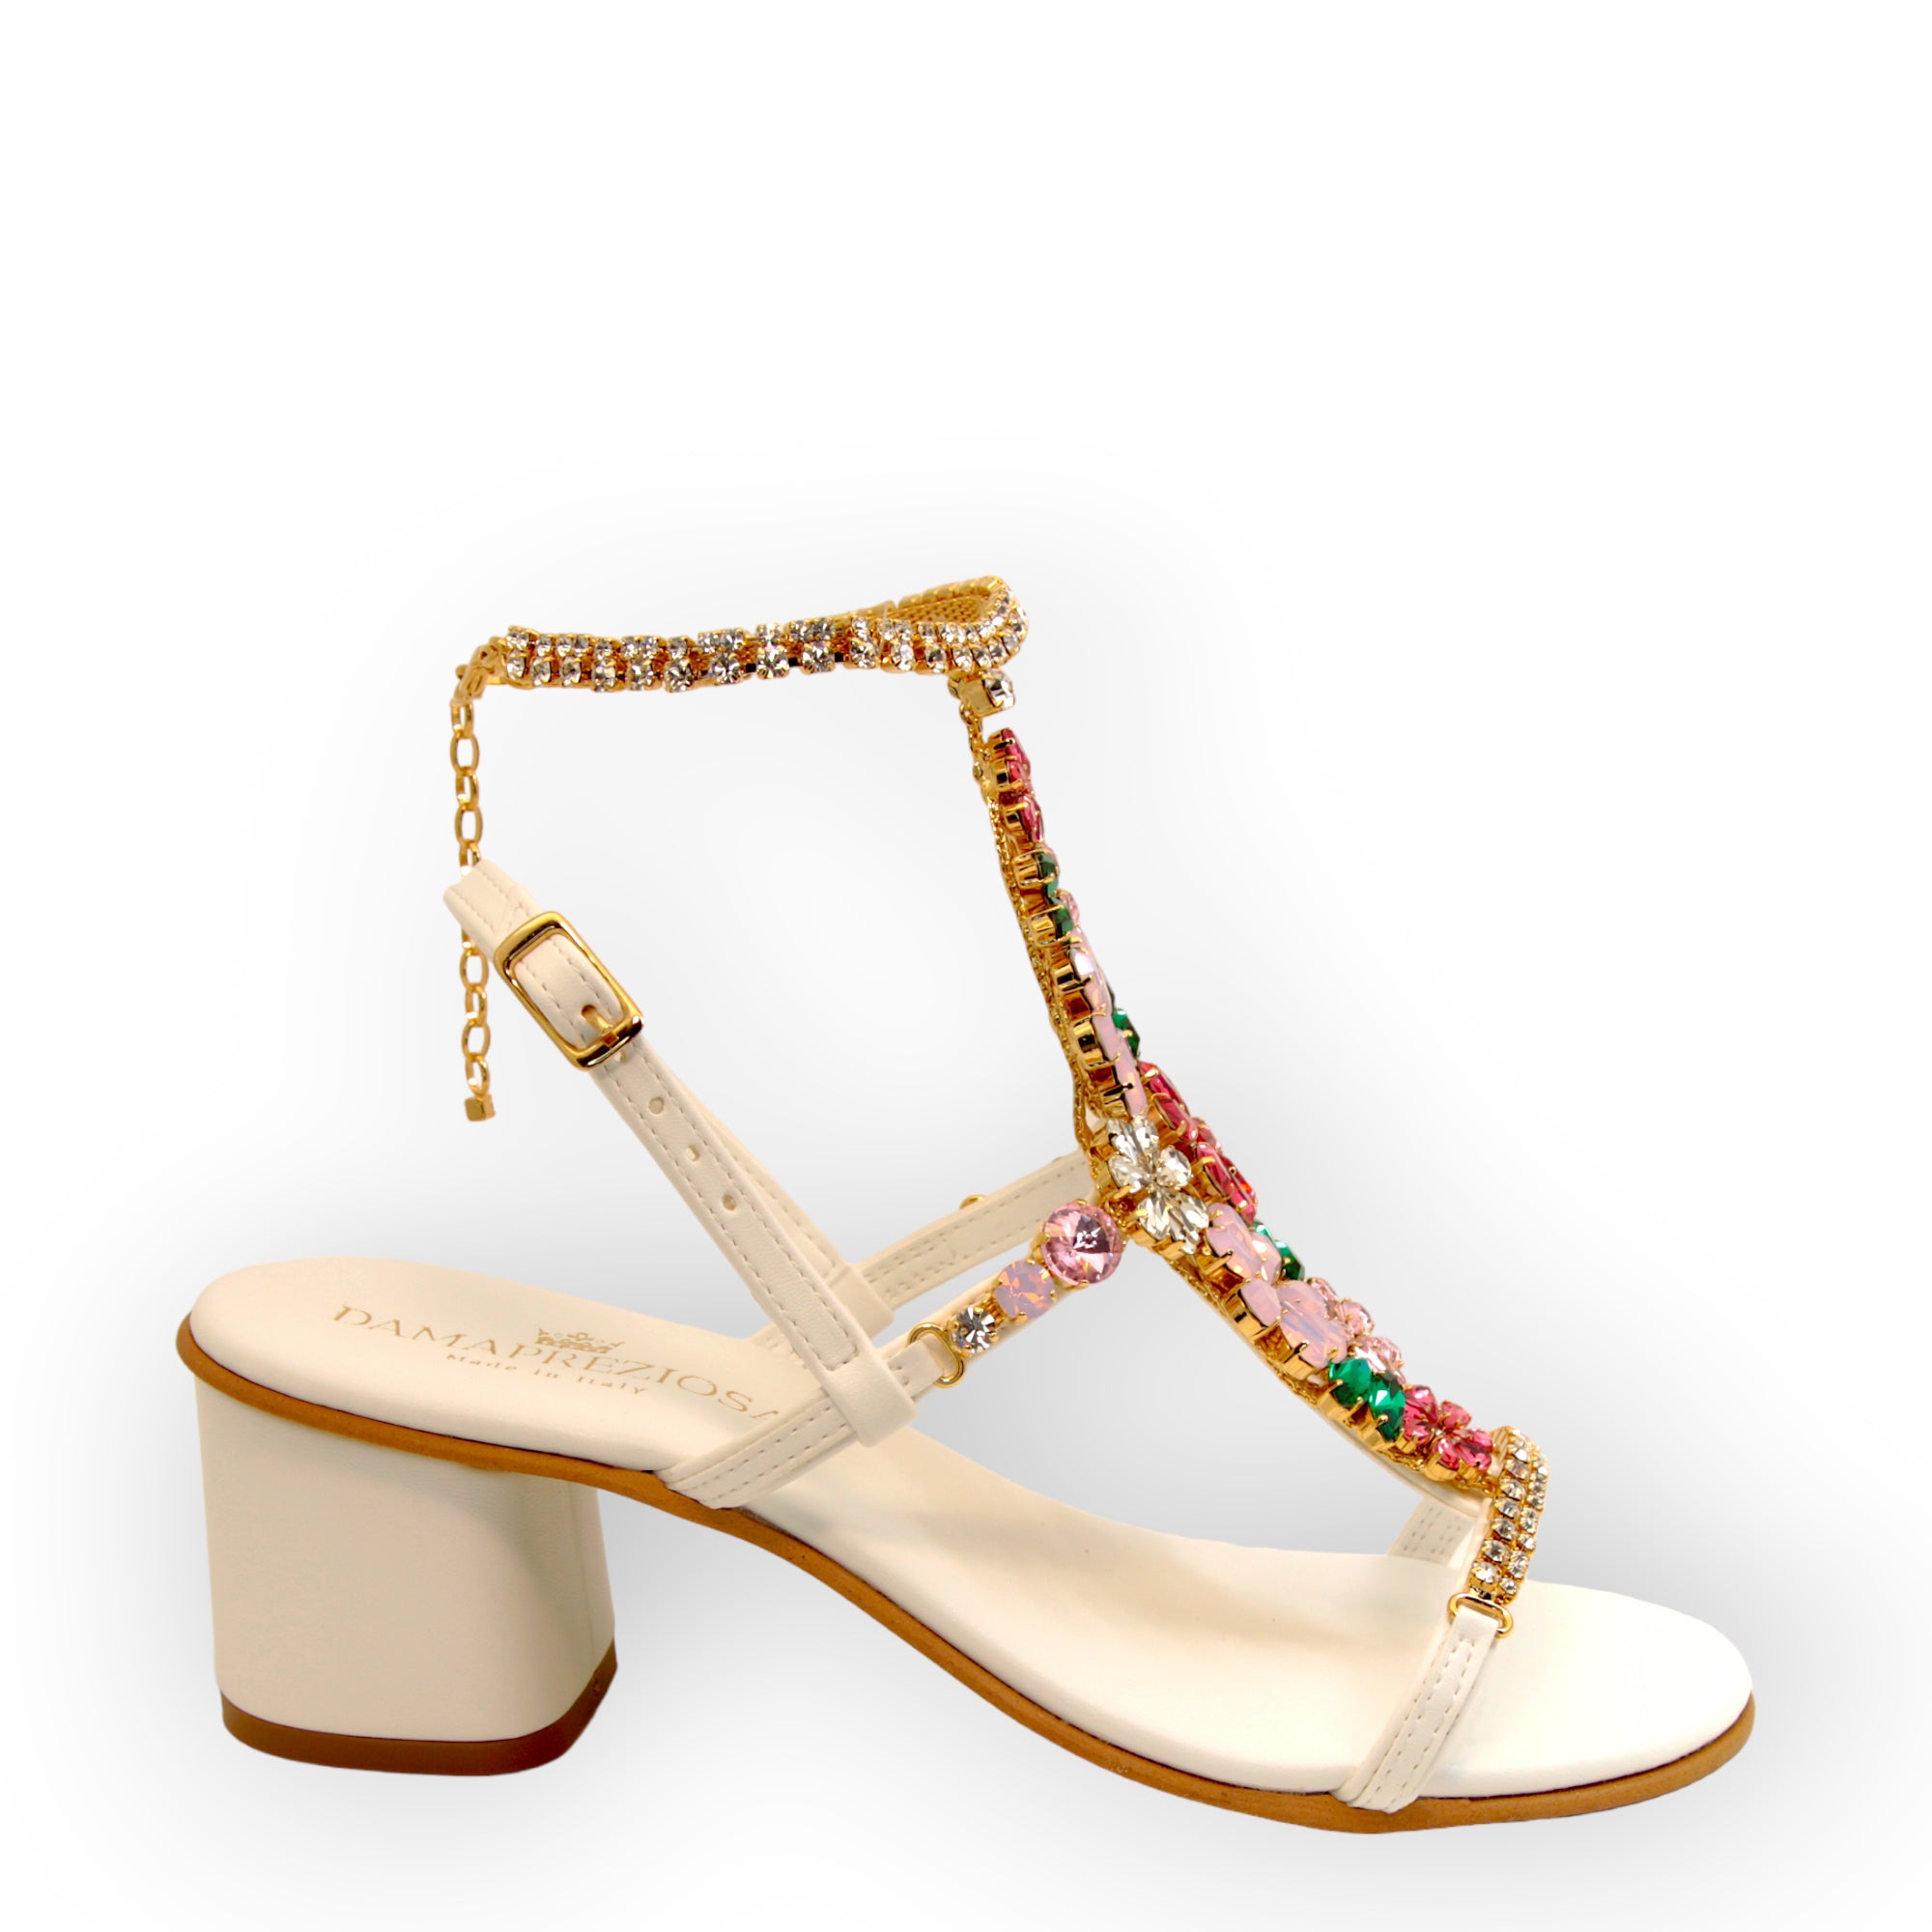 Daisy Bouquet, Jewel Sandal With Crystal Flowers And Block Heel